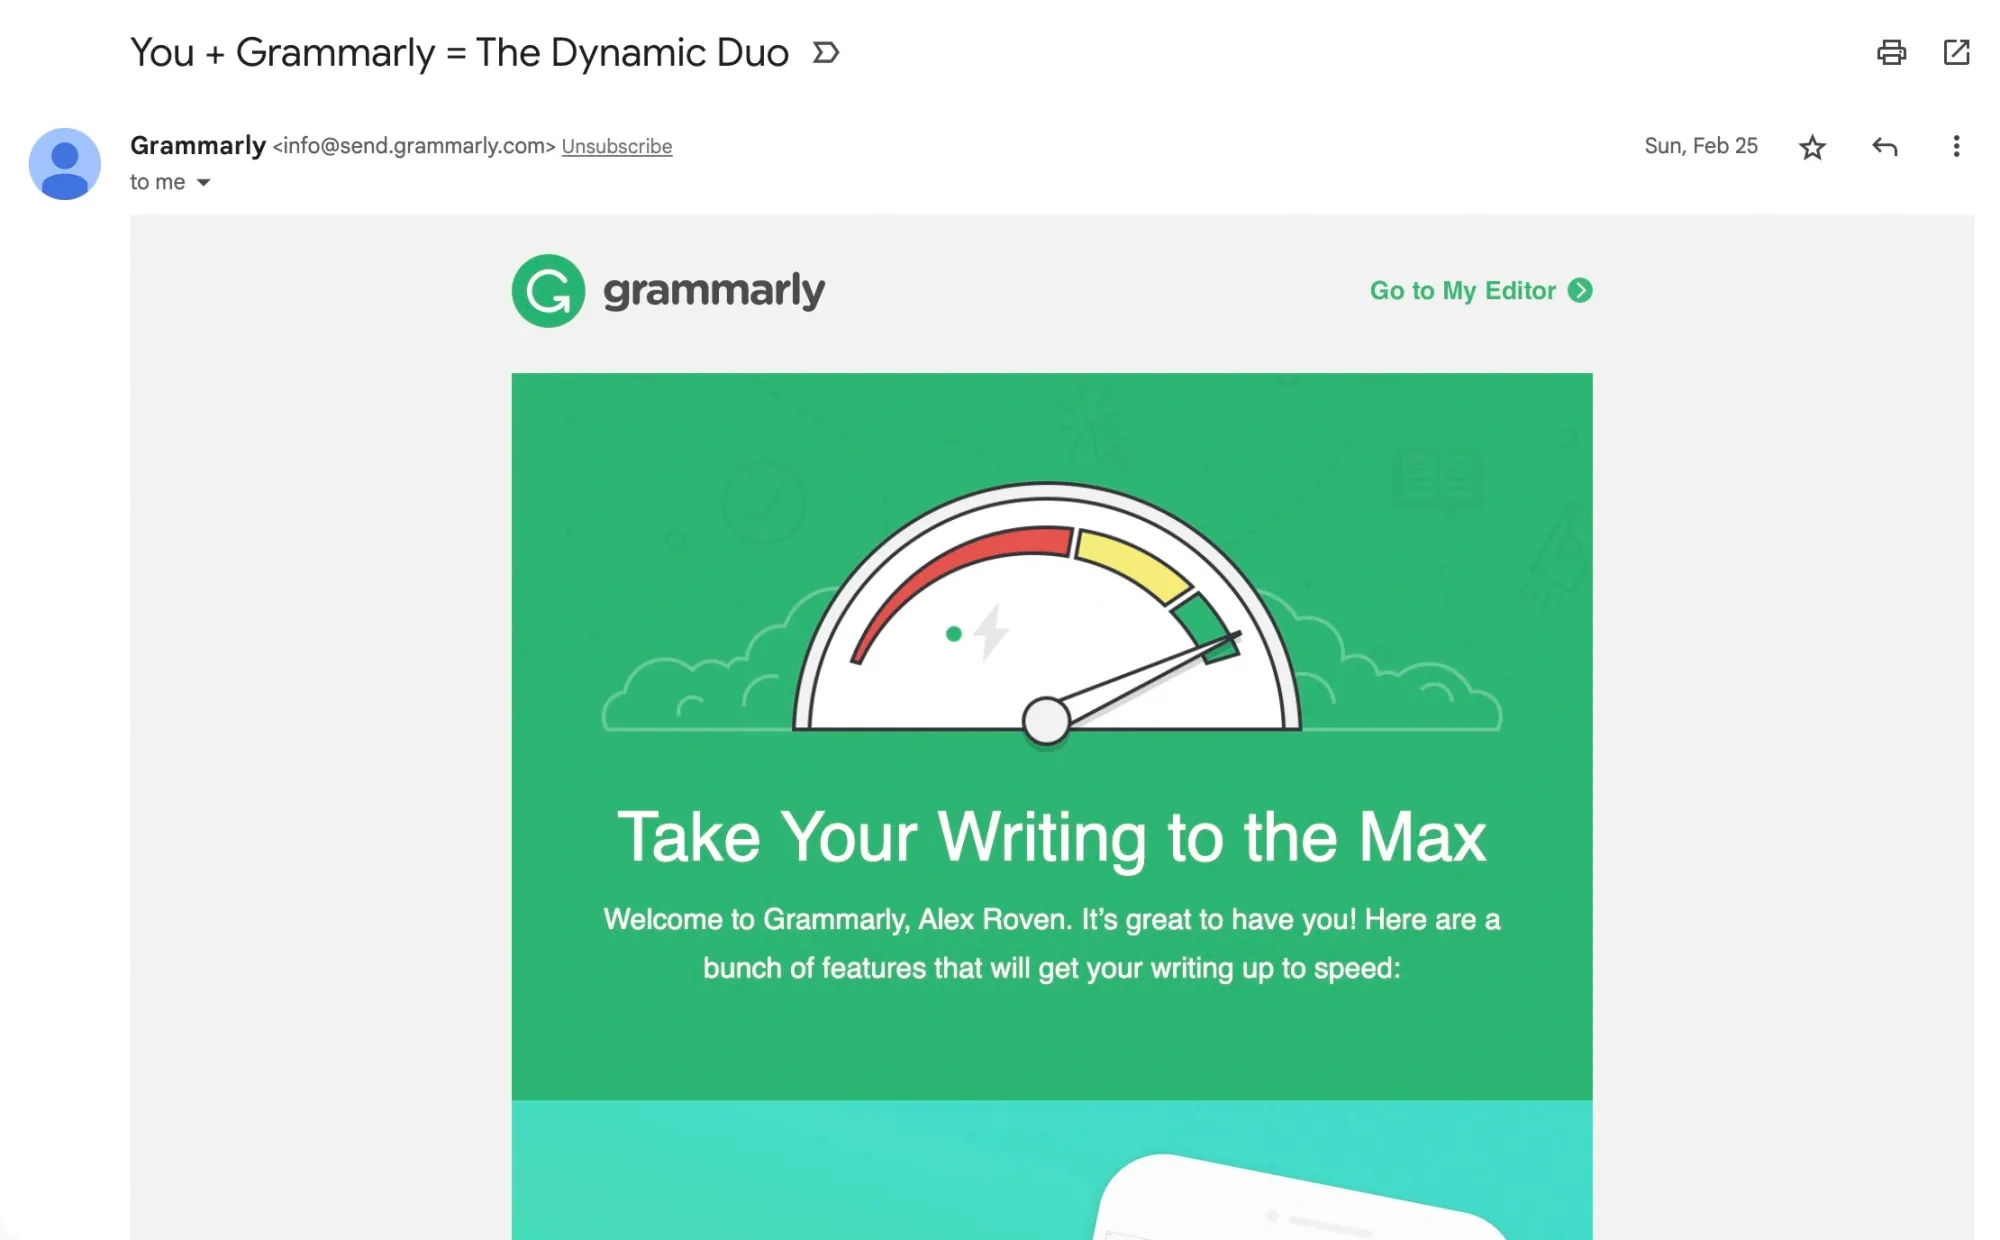 Email Newsletter by Grammarly